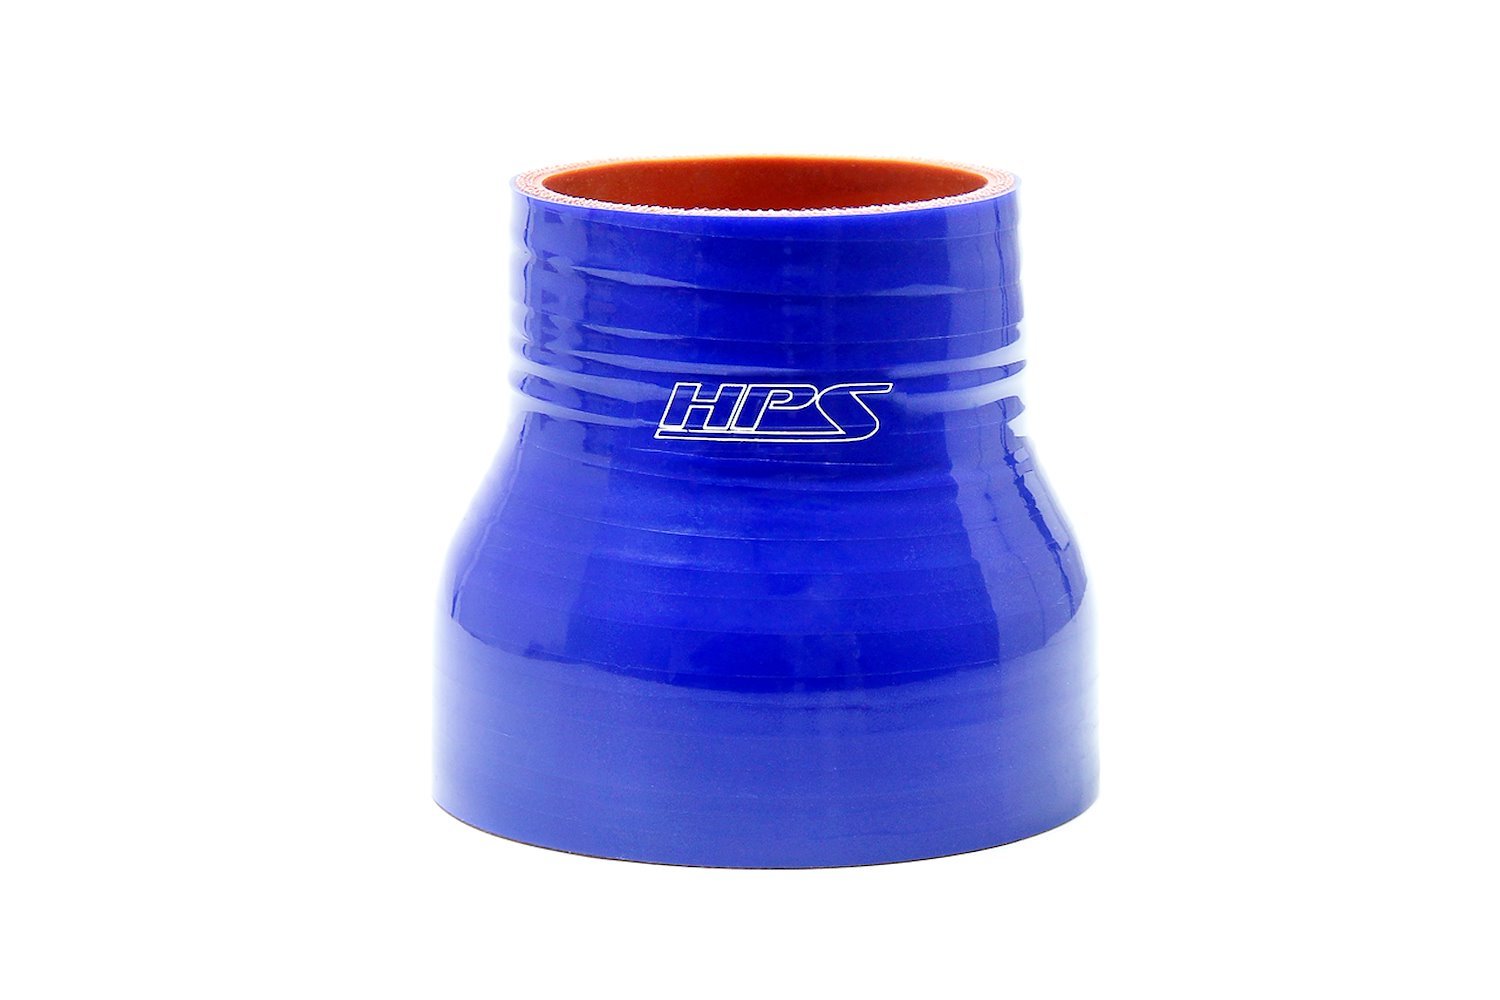 HTSR-250-350-L4-BLUE Silicone Reducer Hose, High-Temp 4-Ply Reinforced, 2-1/2 in. - 3-1/2 in. ID, 4 in. Long, Blue